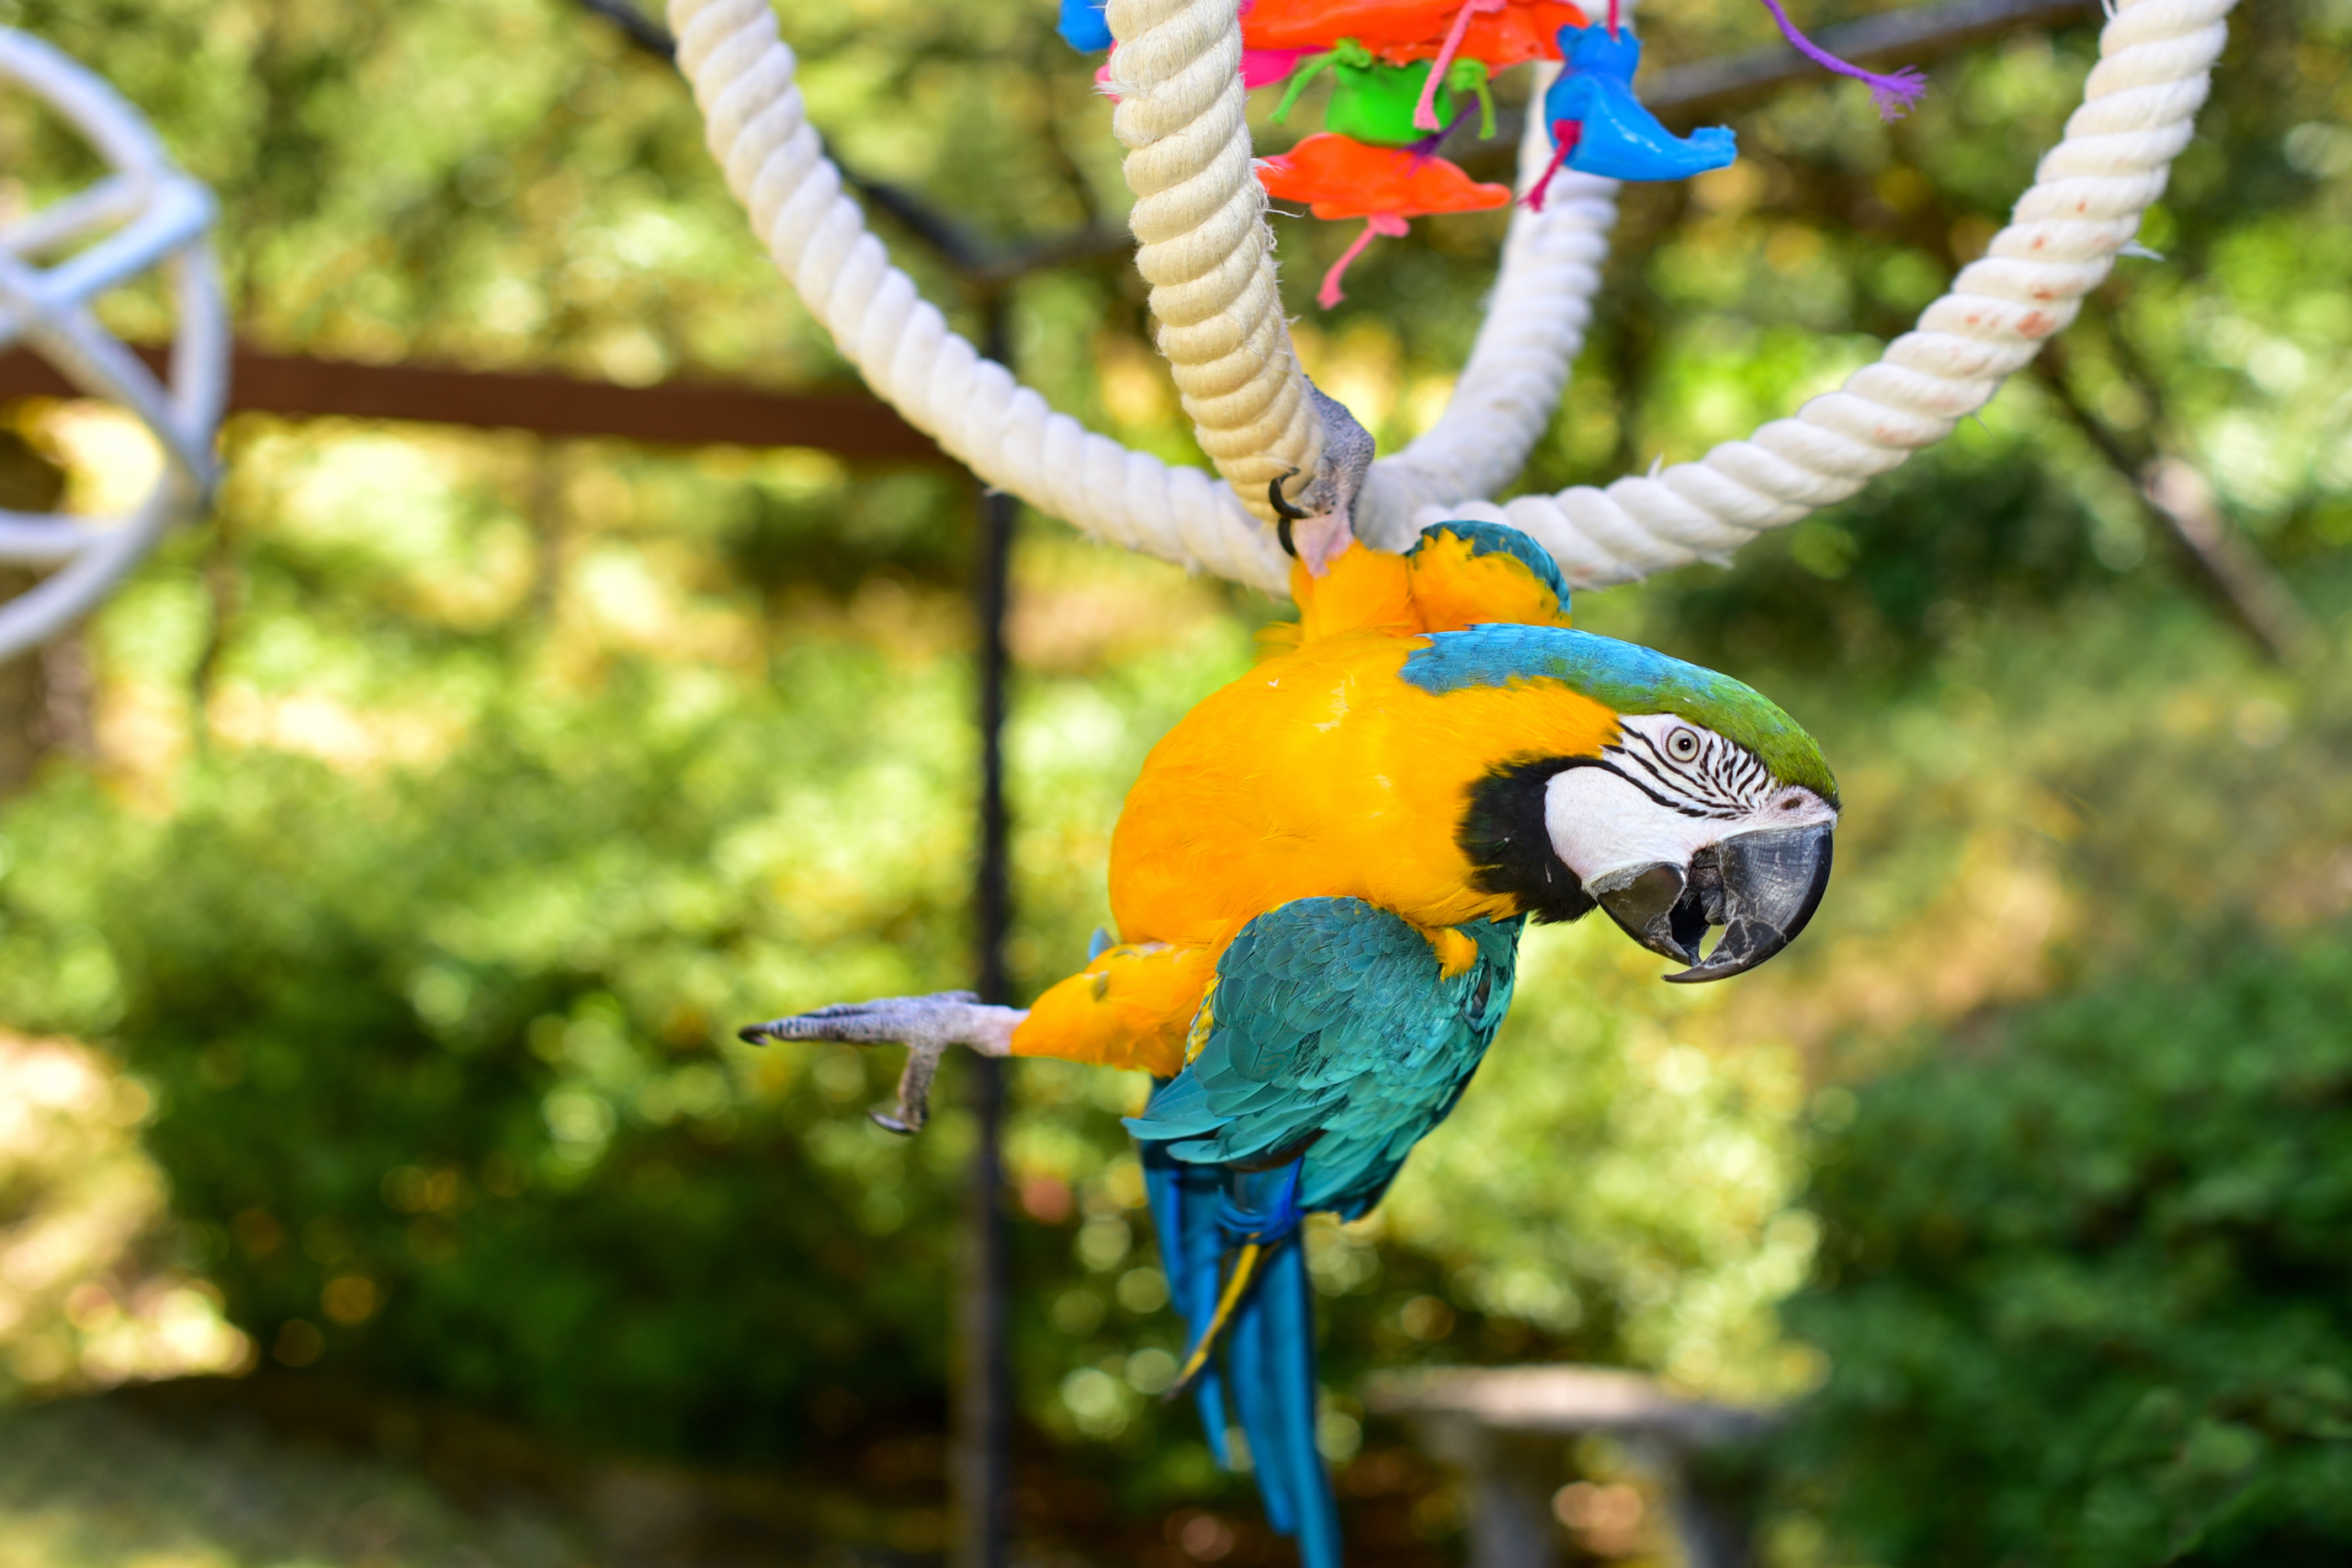 are dog rope toys safe for birds